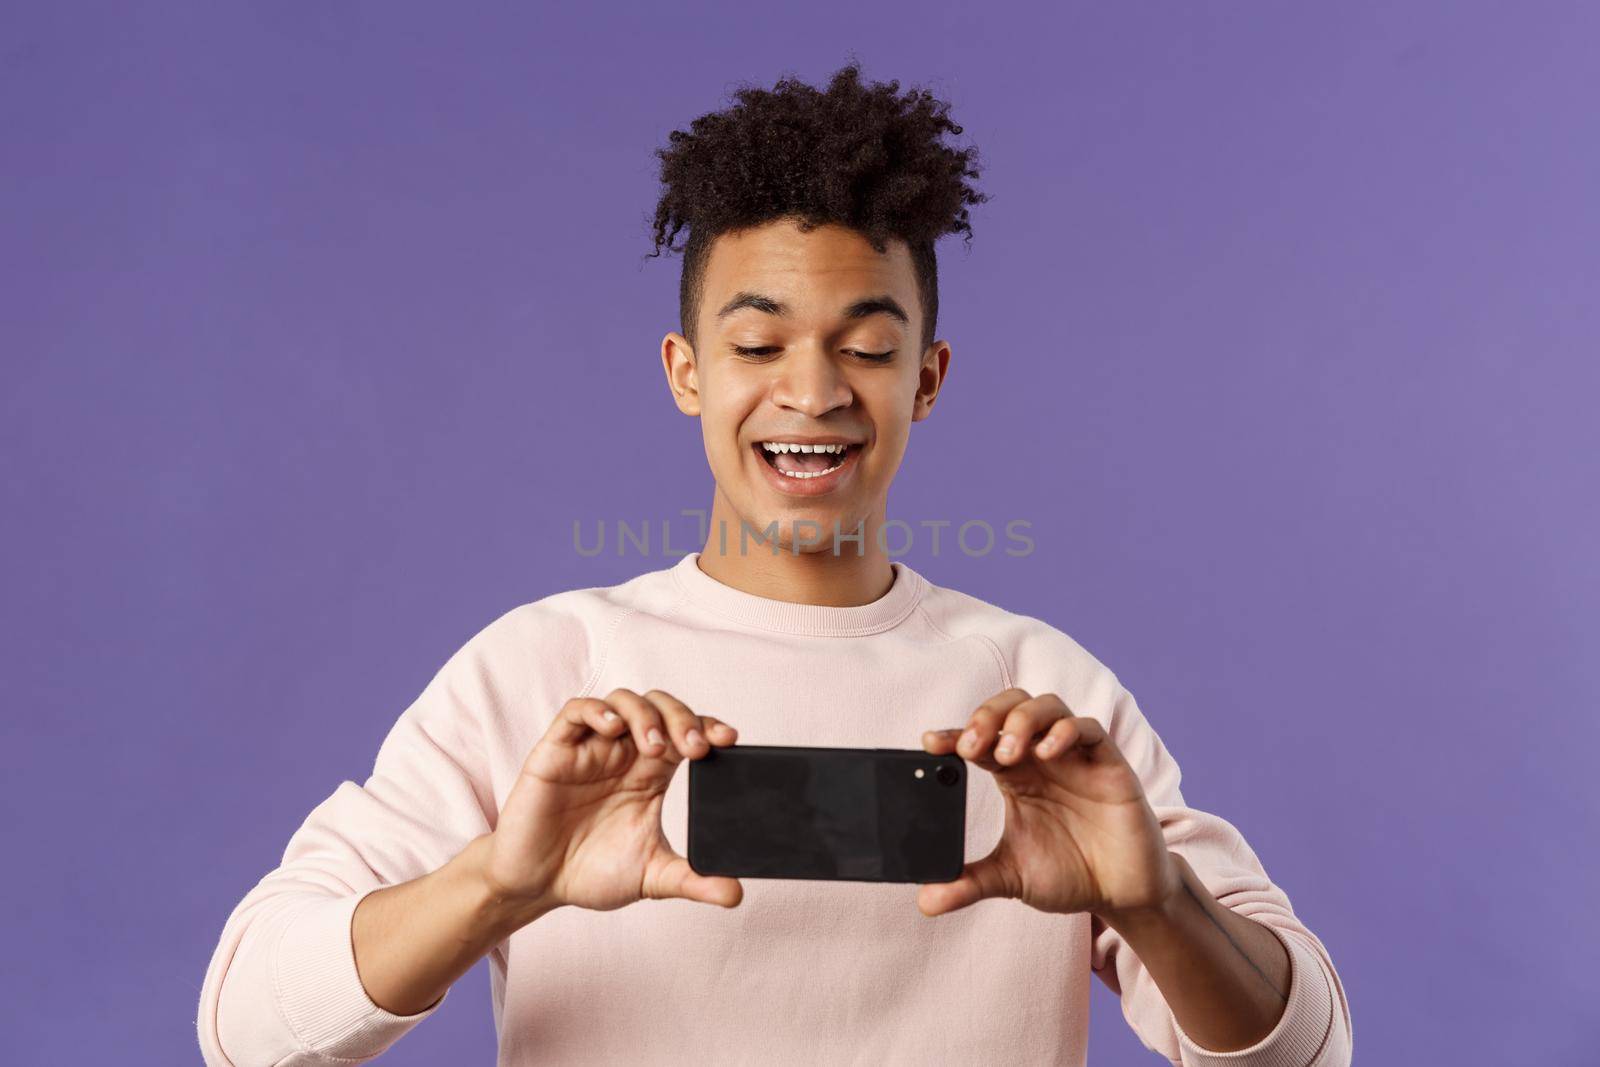 Portrait of amazed, excited young man seeing something interesting, stream concert to his internet social network profile, taking photo or recording video with mobile phone, purple background.